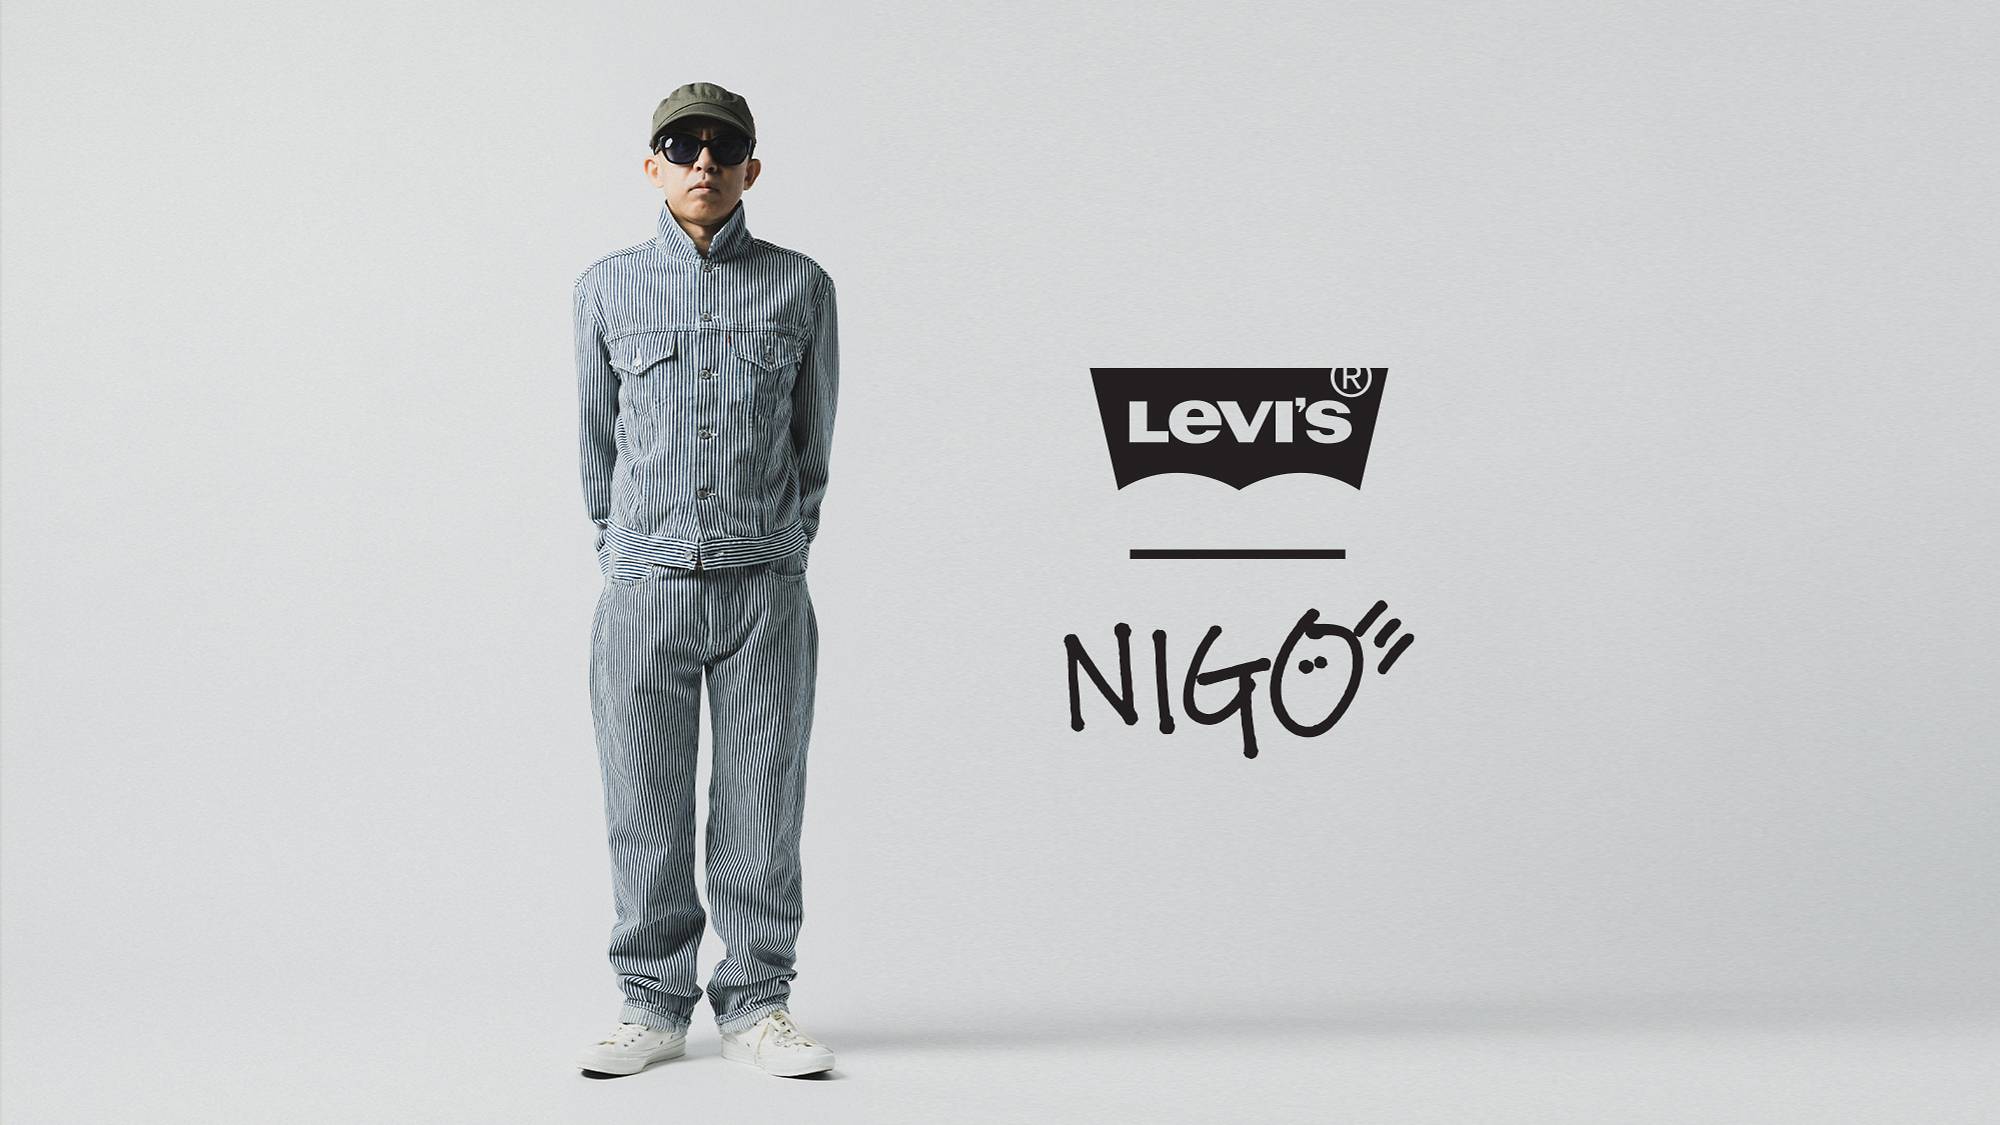 Levi's And Other Denim Companies To Go Into 'Athleisure' - DoYou